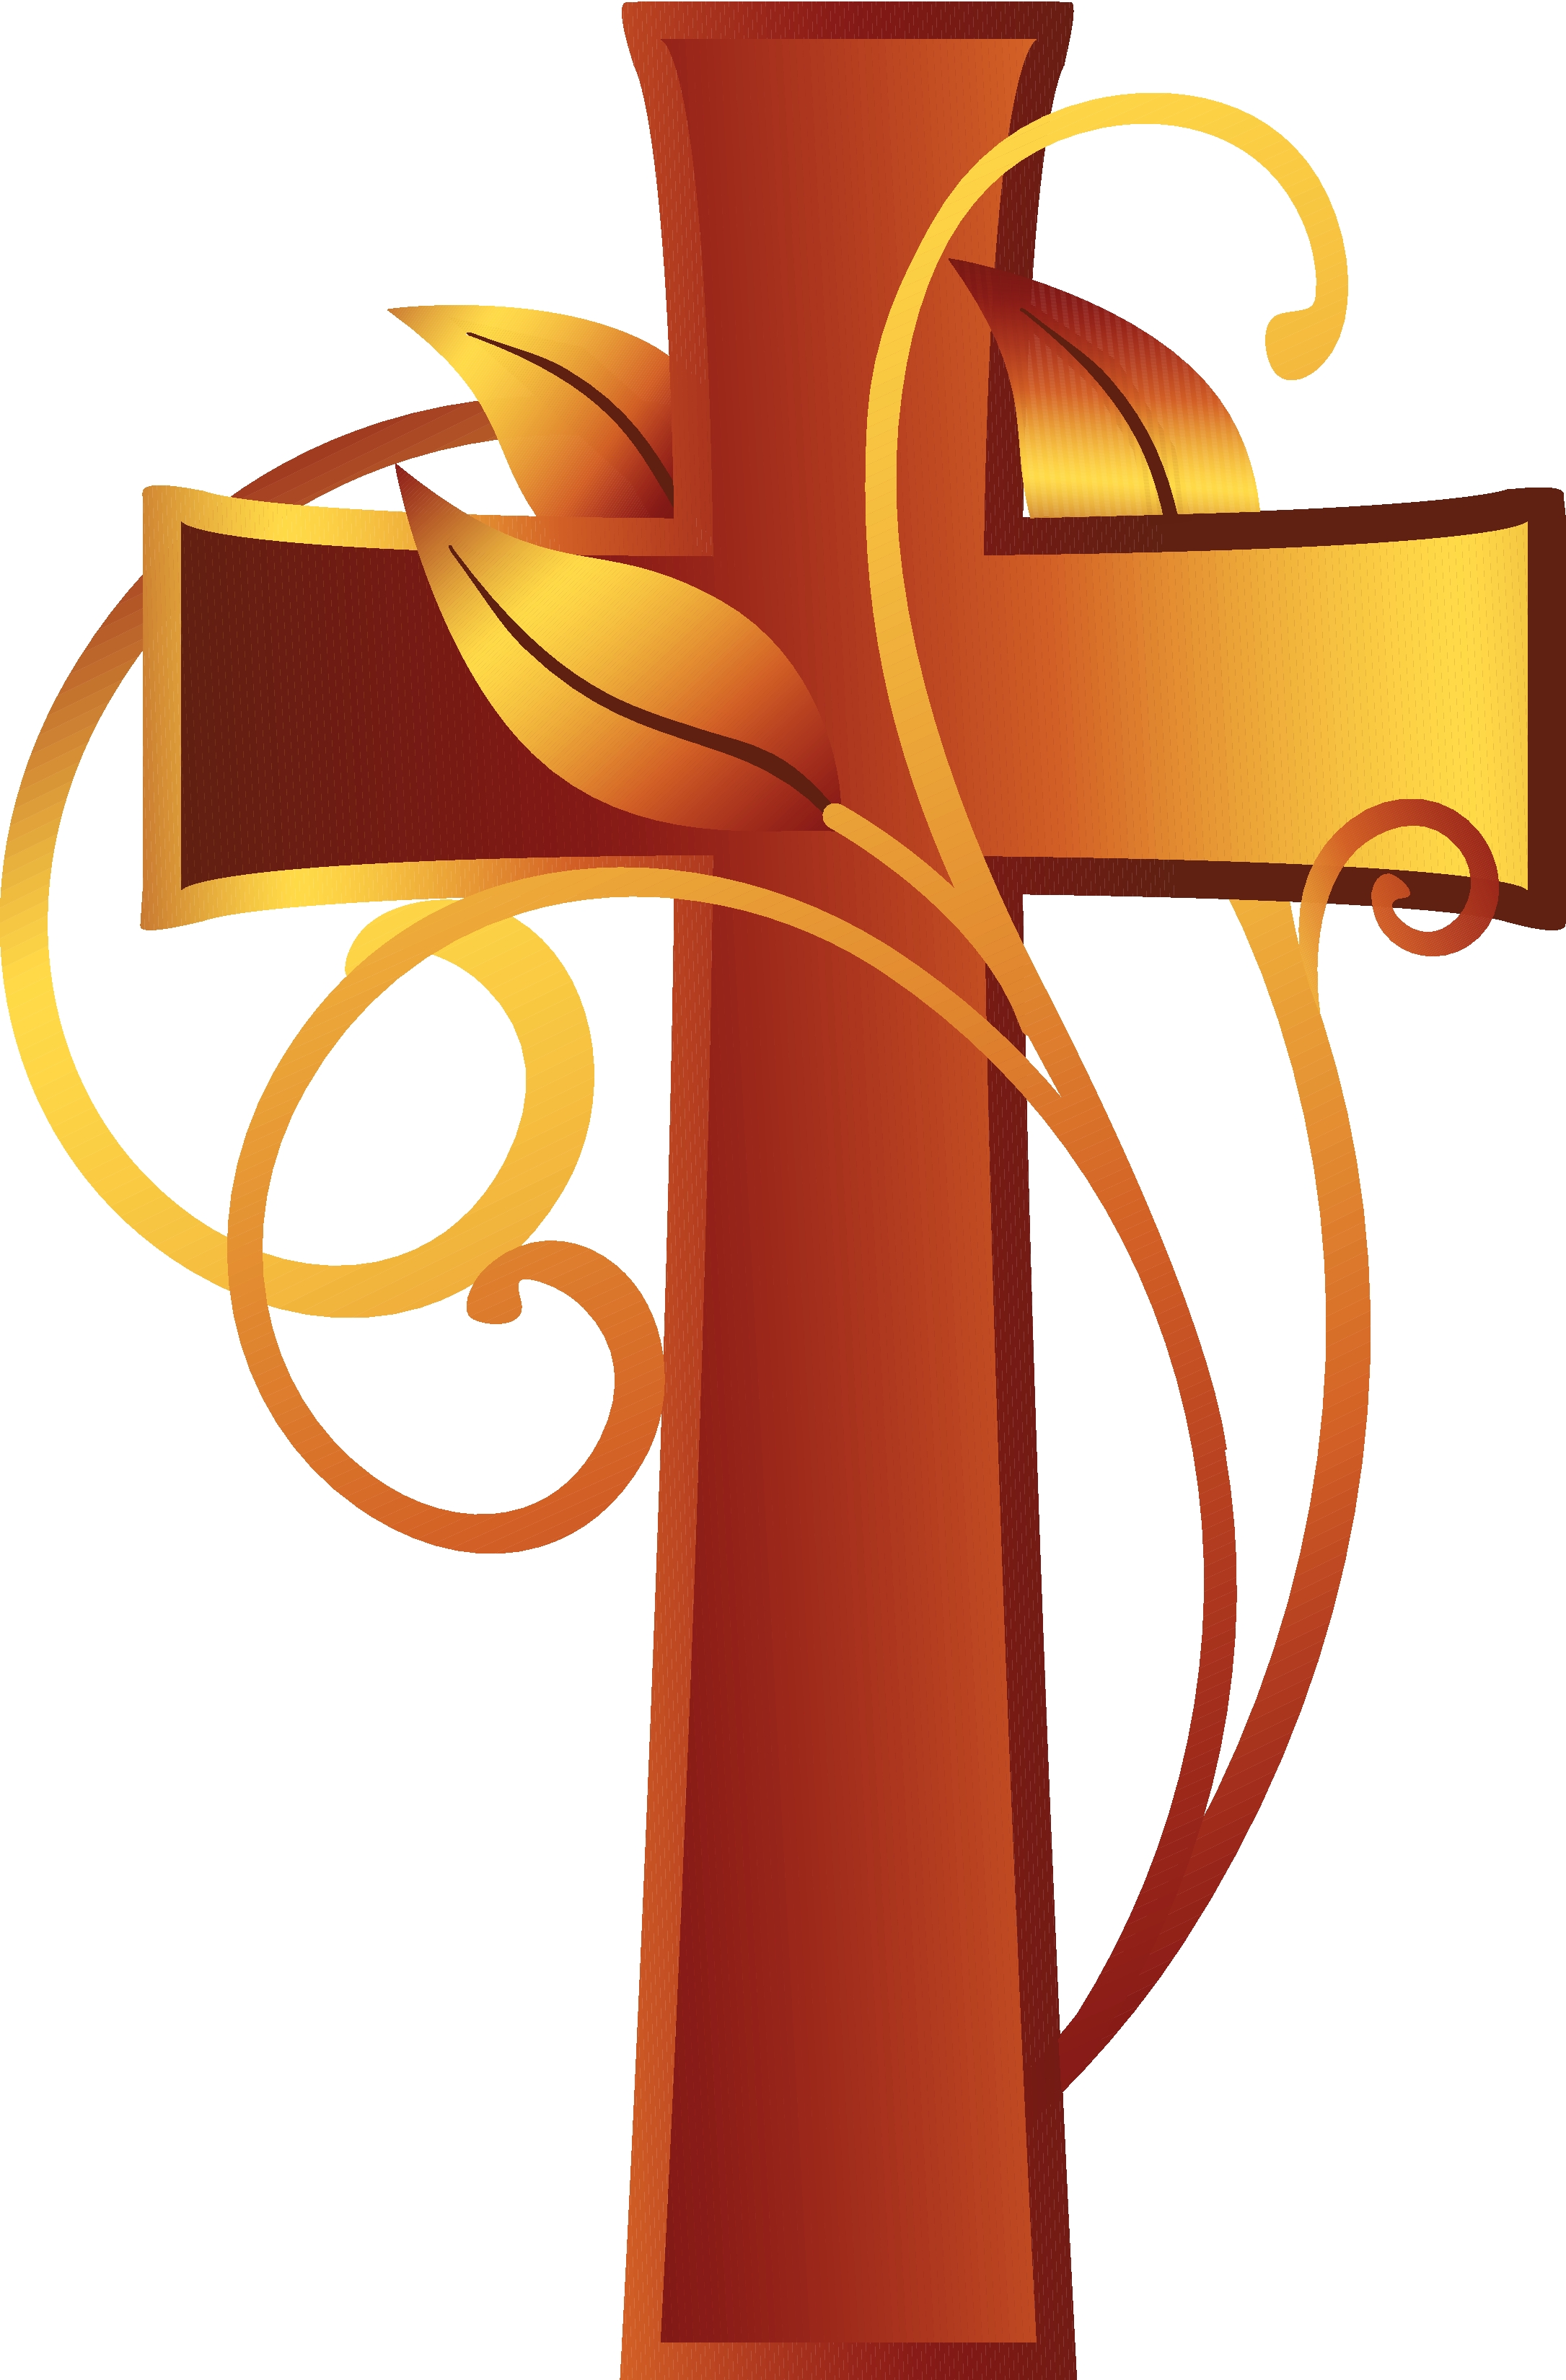 Pix For > Religious Hope Clipart